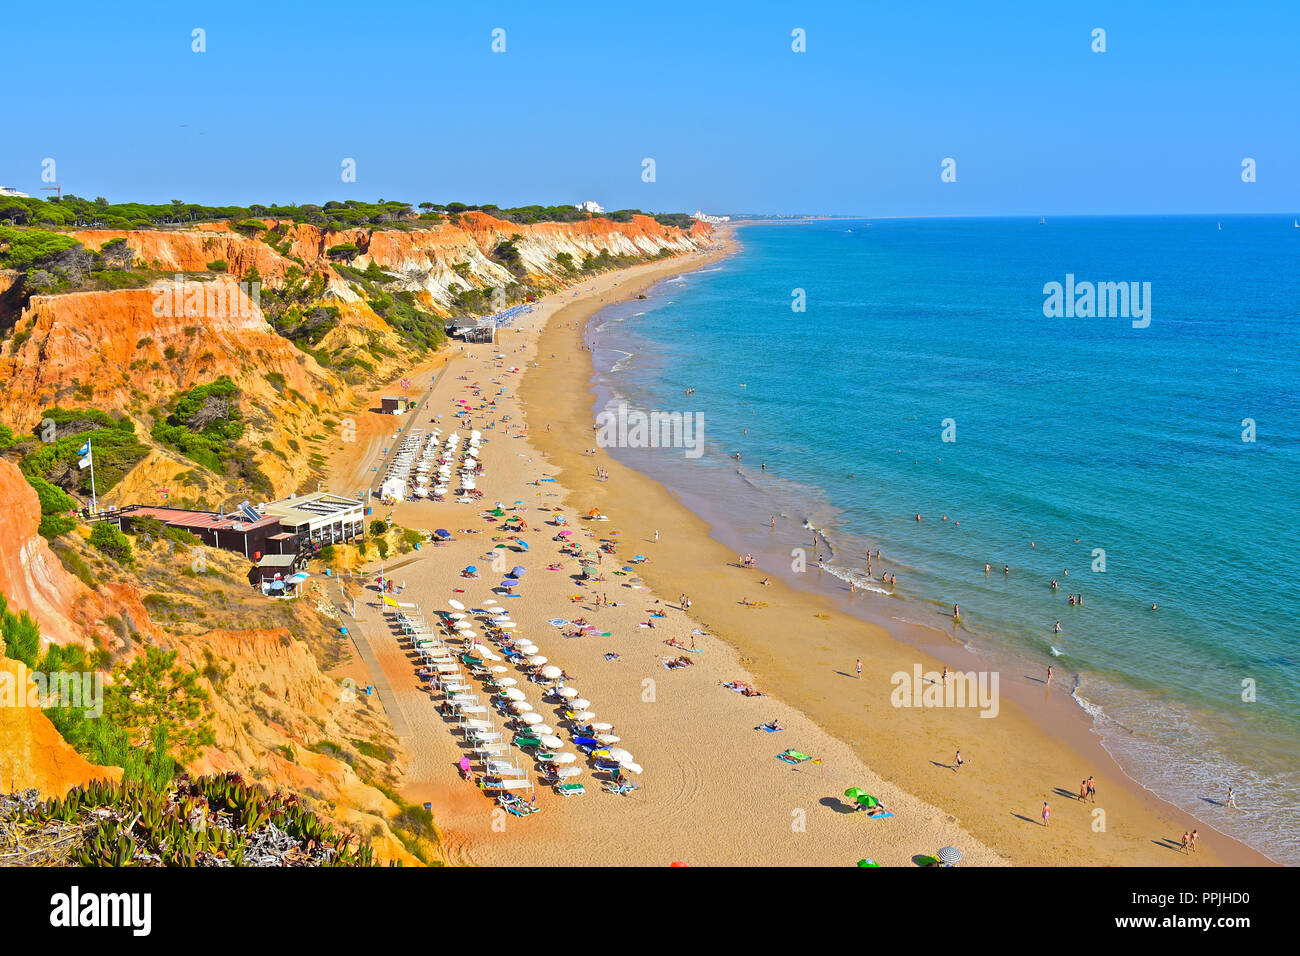 The wonderful golden sandy beach at Praia de Falésia stretches than six kilometres from Vilamoura to Olhos d'Agua, in the Algarve region of Portugal. Stock Photo